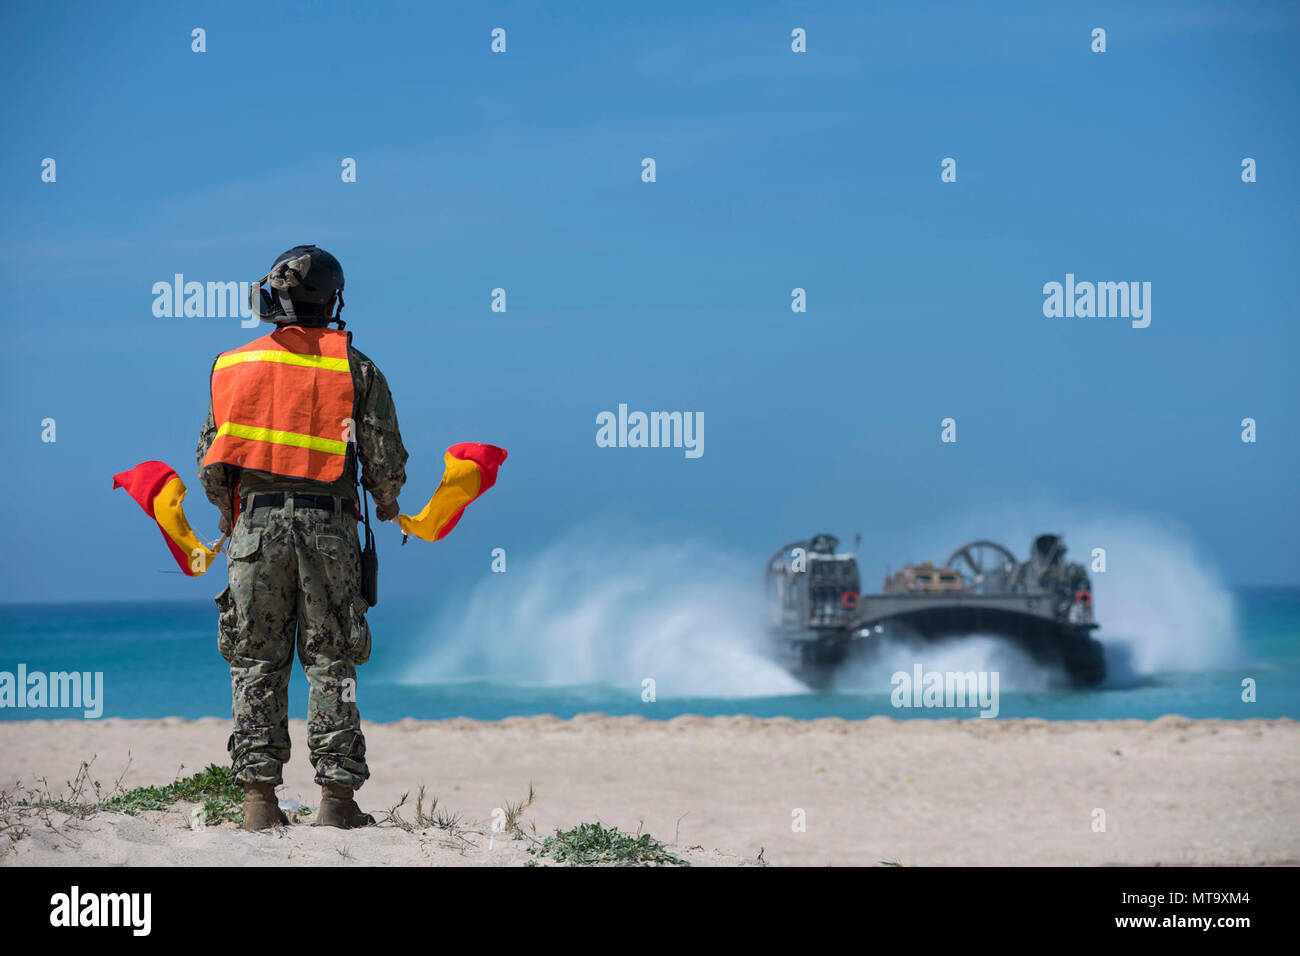 HAIFA, ISRAEL (March 7, 2018) Logistics Specialist Seaman Denny Figueroa, from Bayamon, Puerto Rico, and assigned to Beach Master Unit (BMU) 2, signals Landing Craft, Air Cushion 67, attached to Assault Craft Unit (ACU) 4, as it prepares to make landfall on the beach in Israel, March 7, 2018. The Wasp-class amphibious assault ship USS Iwo Jima (LHD 7), homeported in Mayport, Florida, is participating in Juniper Cobra 2018 and conducting naval operations in the U.S 6th Fleet area of operations. JC18 is a computer-assisted exercise conducted through computer simulations focused on improving comb Stock Photo